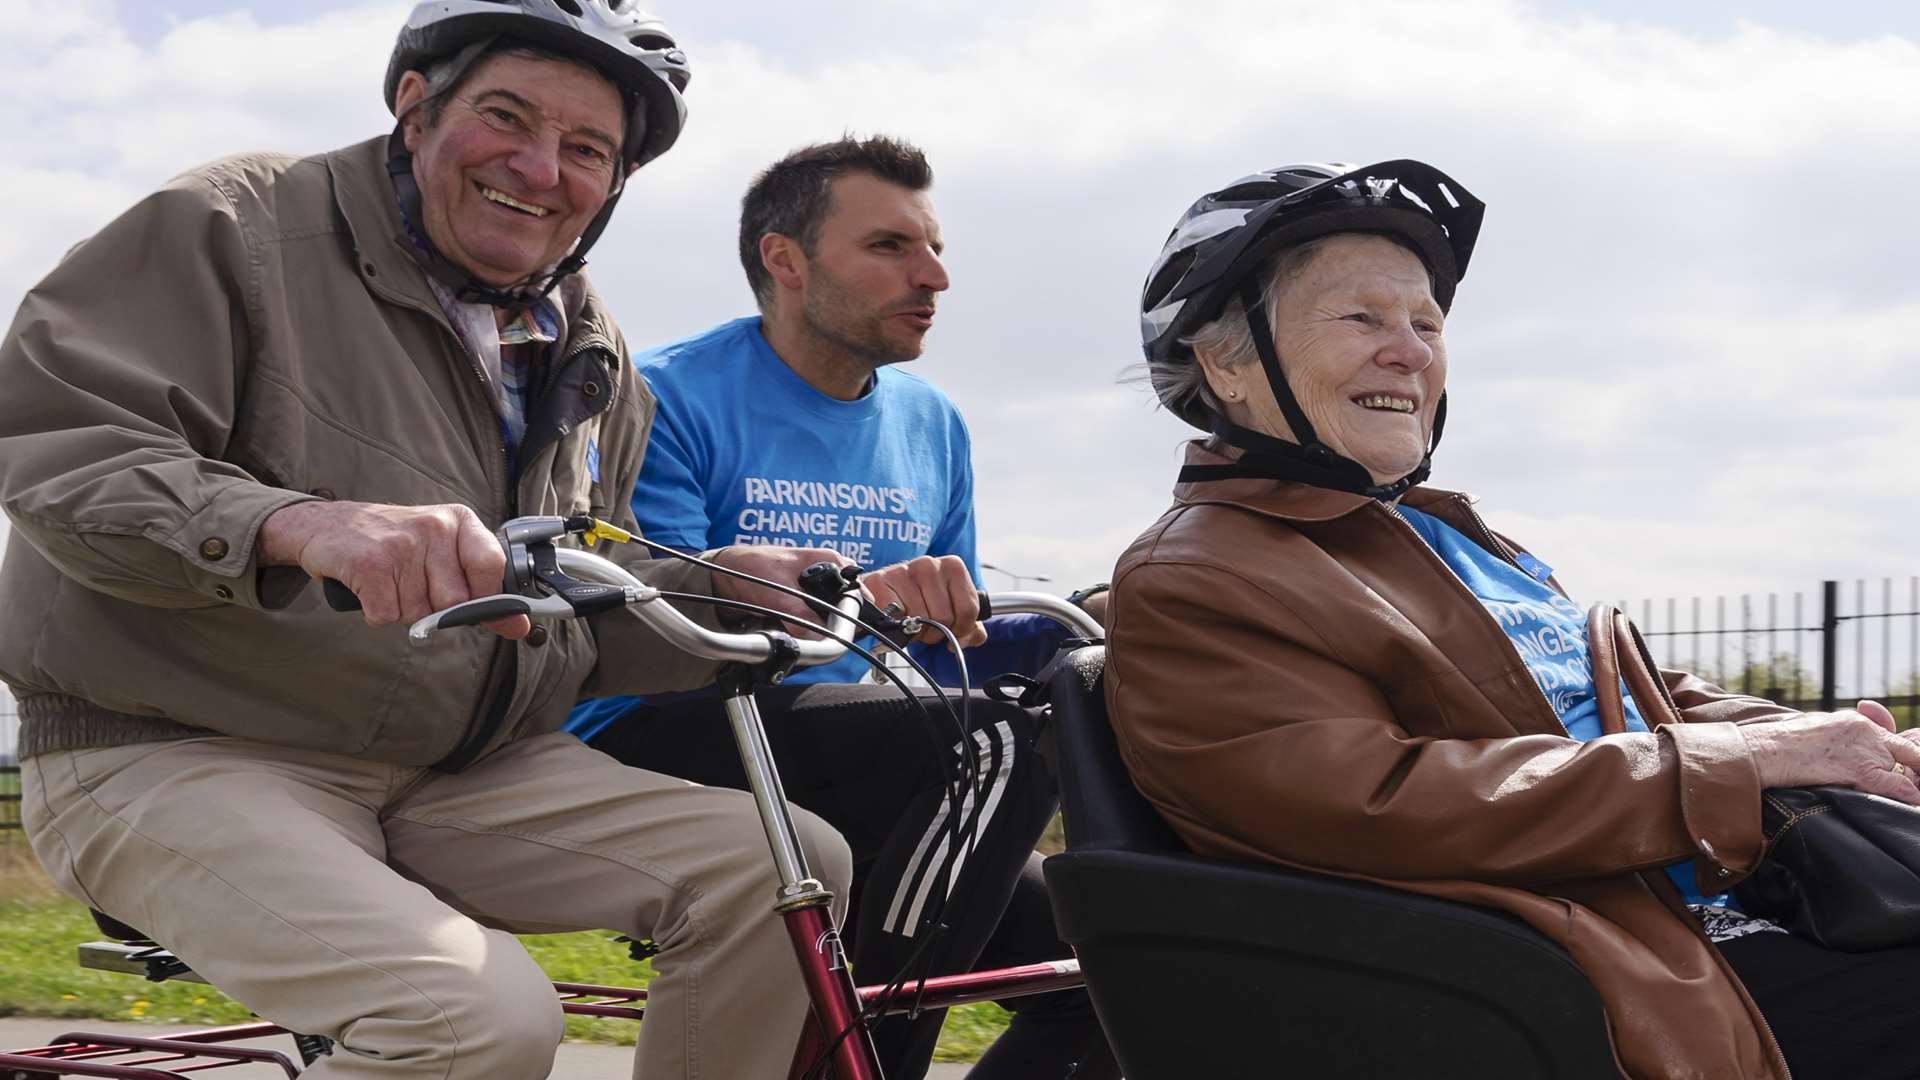 Visitors get to grips with the specially adapted bikes. Picture: Andy Payton